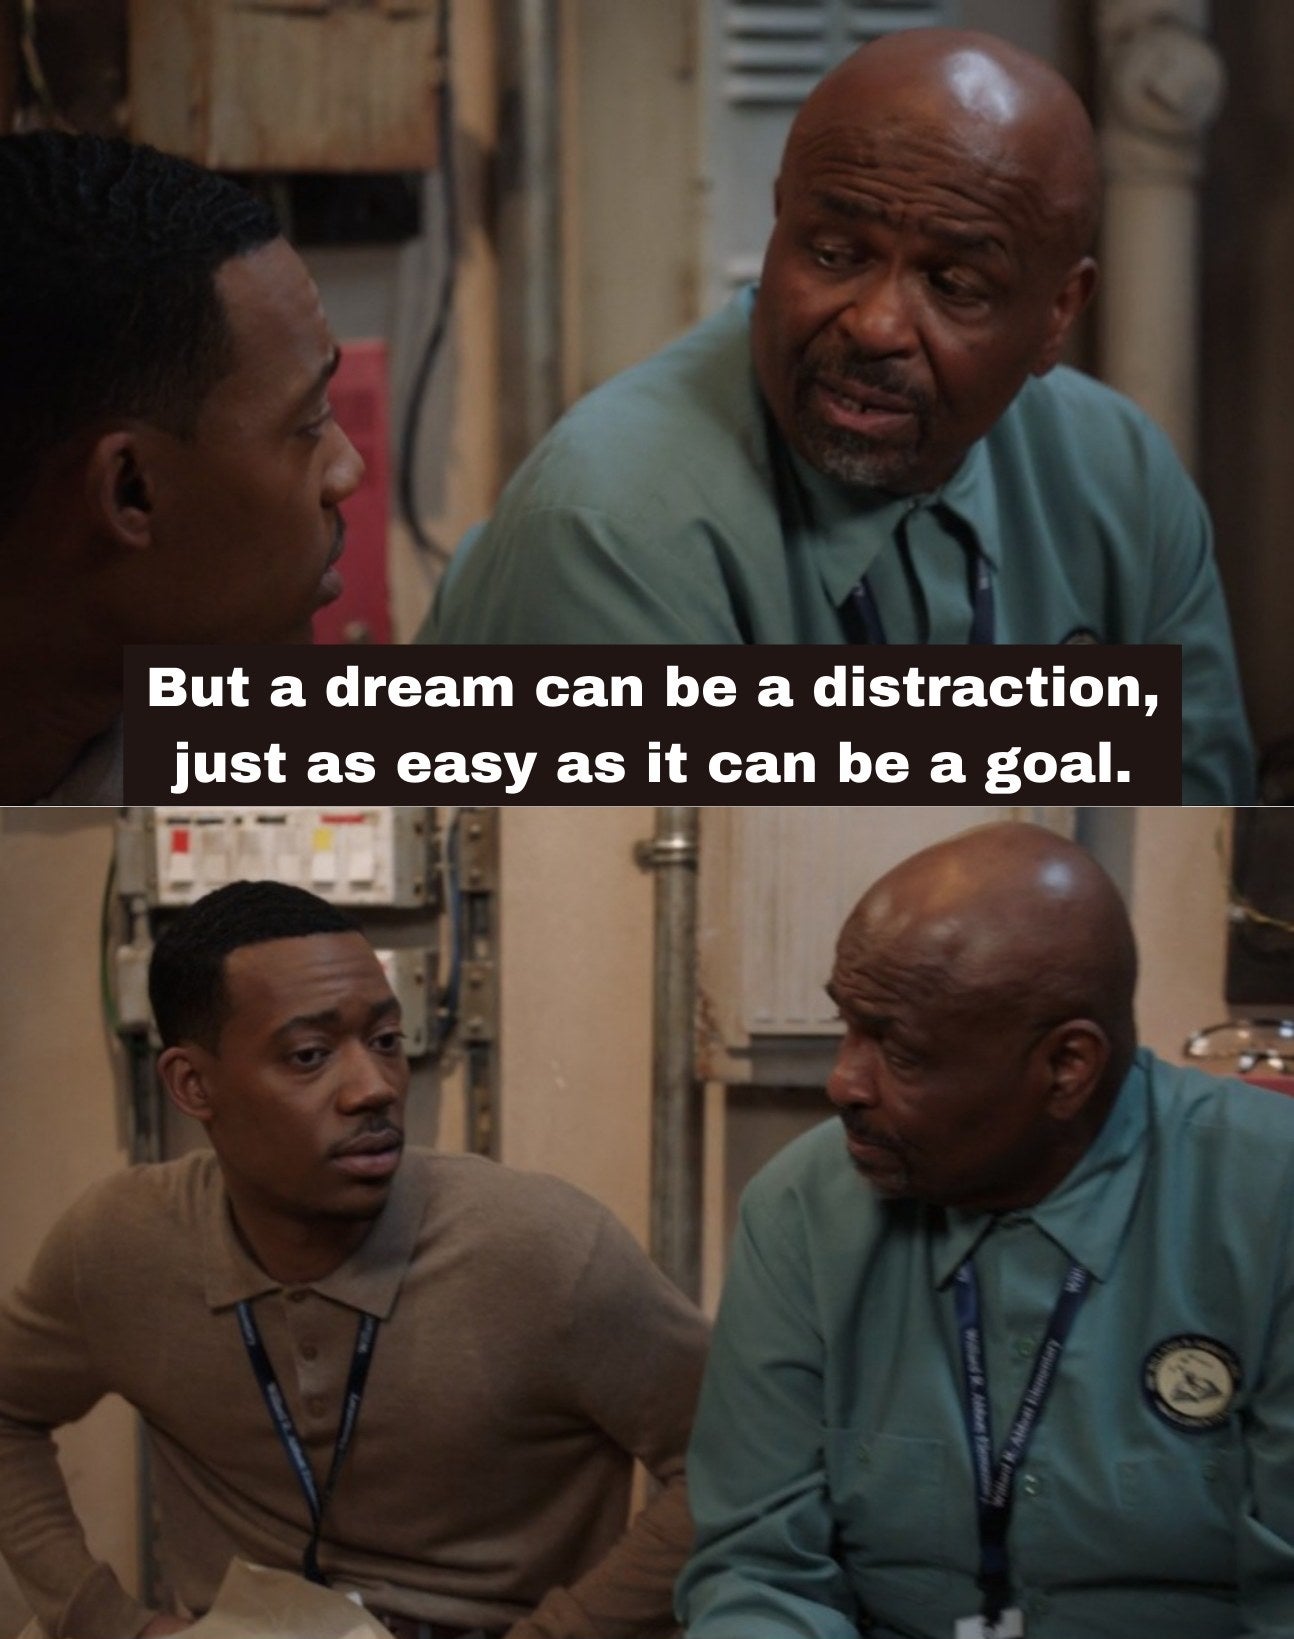 Gregory and Mr. Johnson have a conversation. Mr. Johnson says, &quot;But a dream can be a distraction, just as easy as it can be a goal&quot;